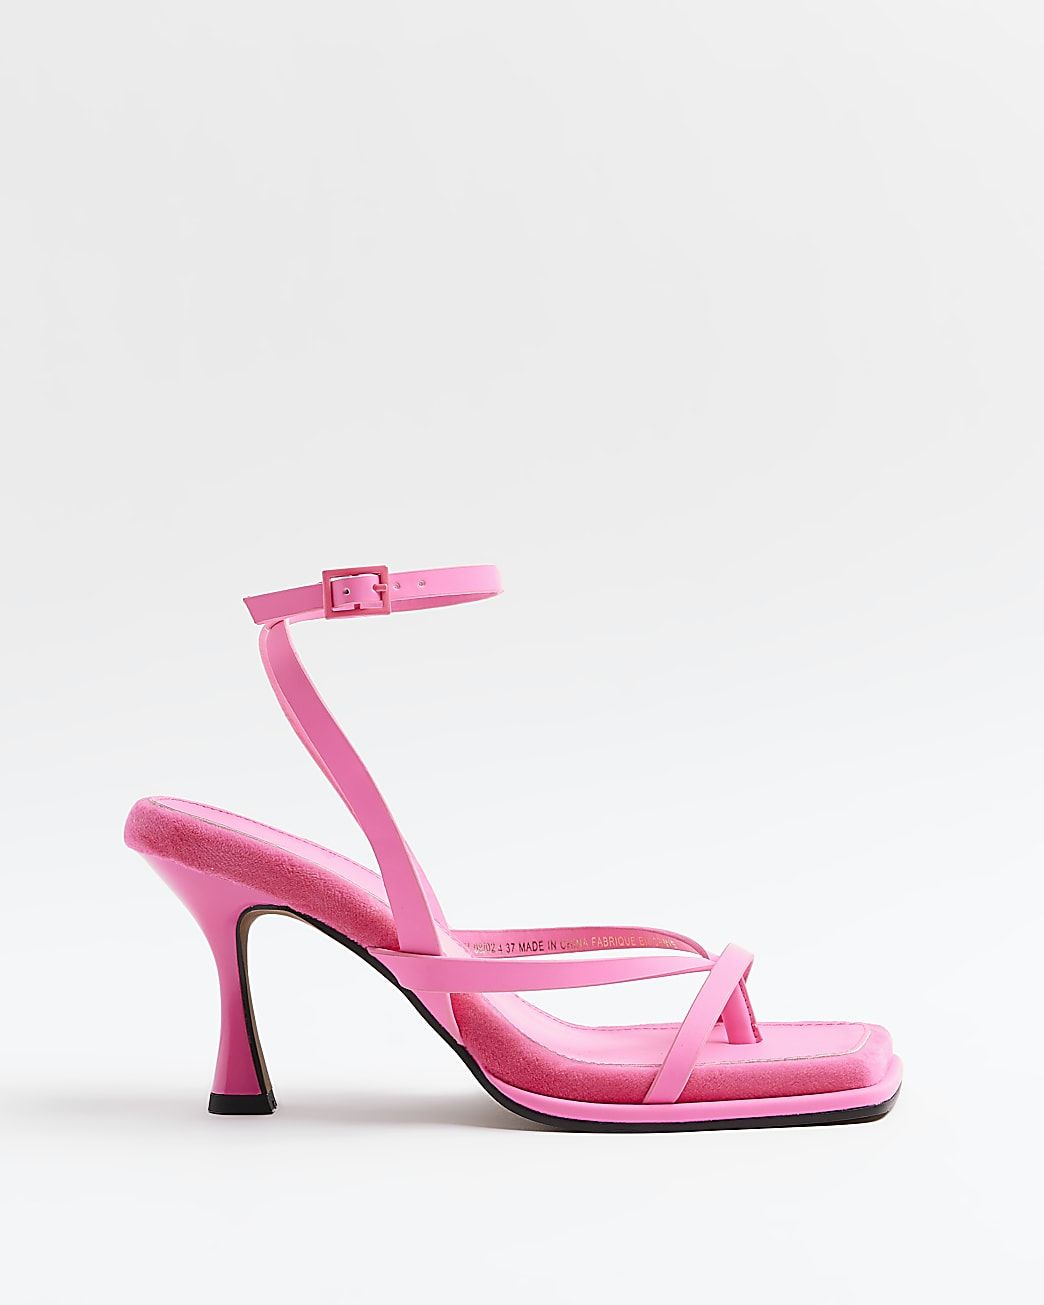 Stylish and Chic: The Ultimate Guide to
Pink Strappy Heels